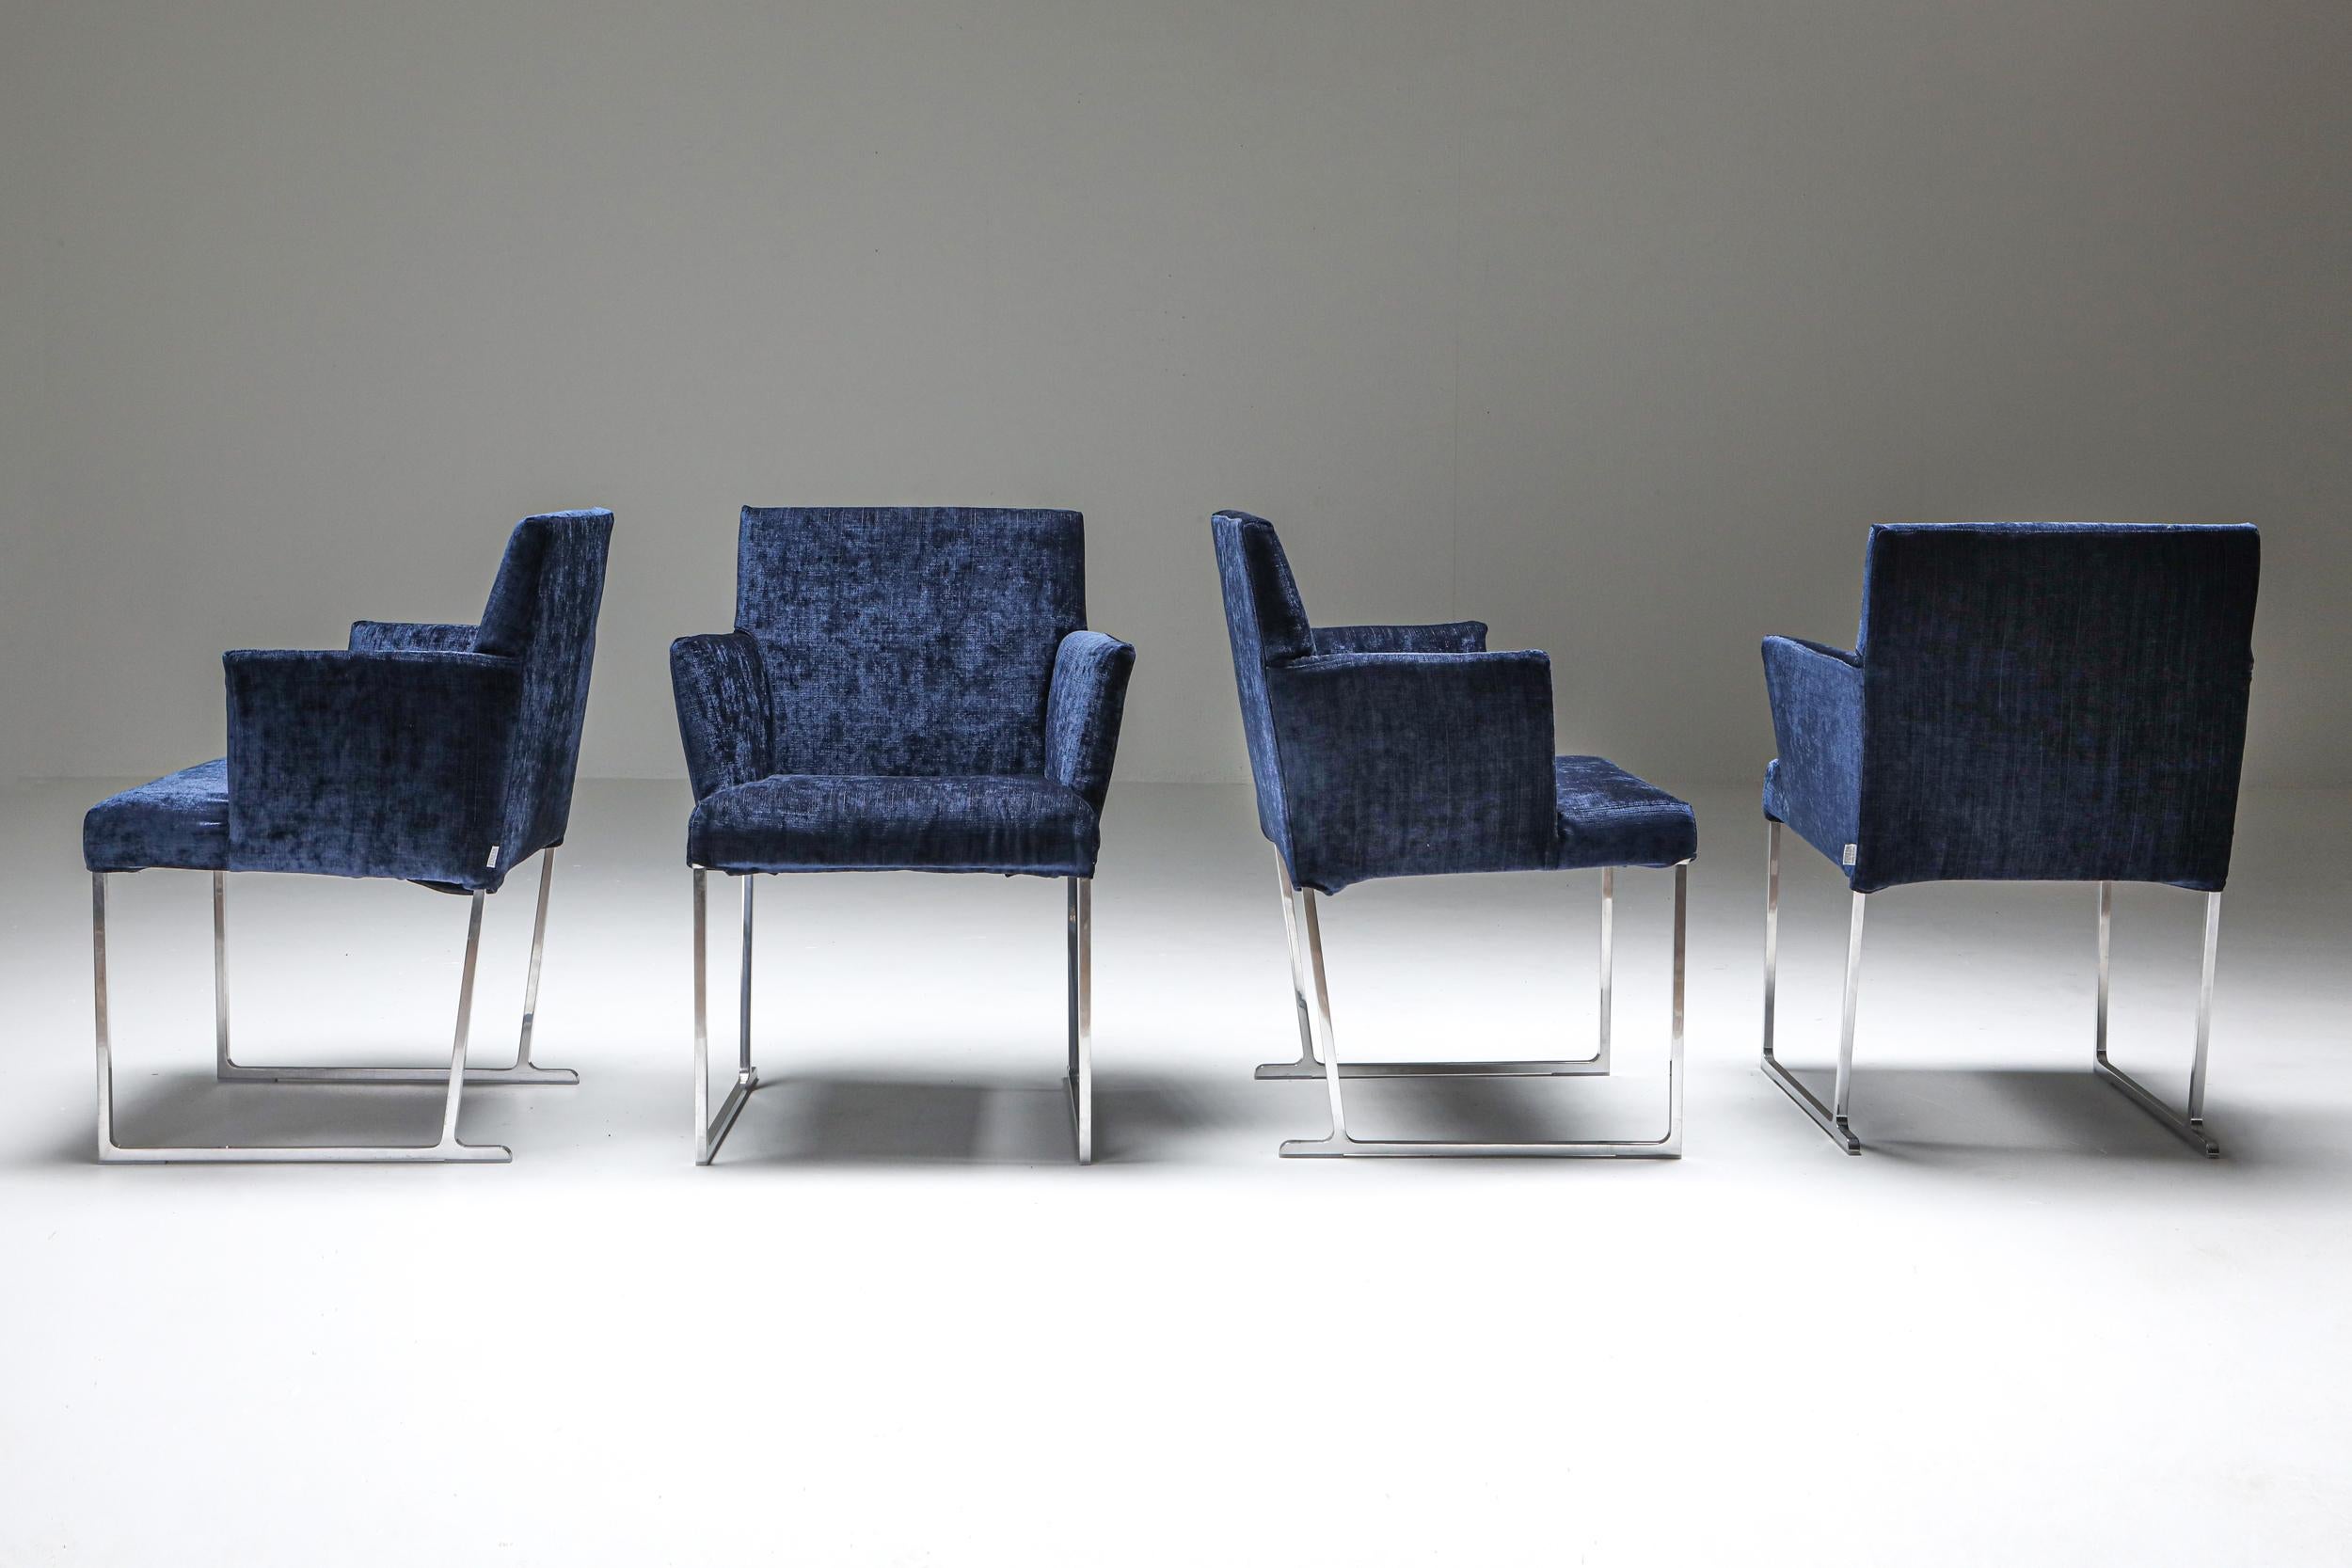 Modern Solo Chairs by Antonio Citterio for B&B Italia, Italy, 2000s For Sale